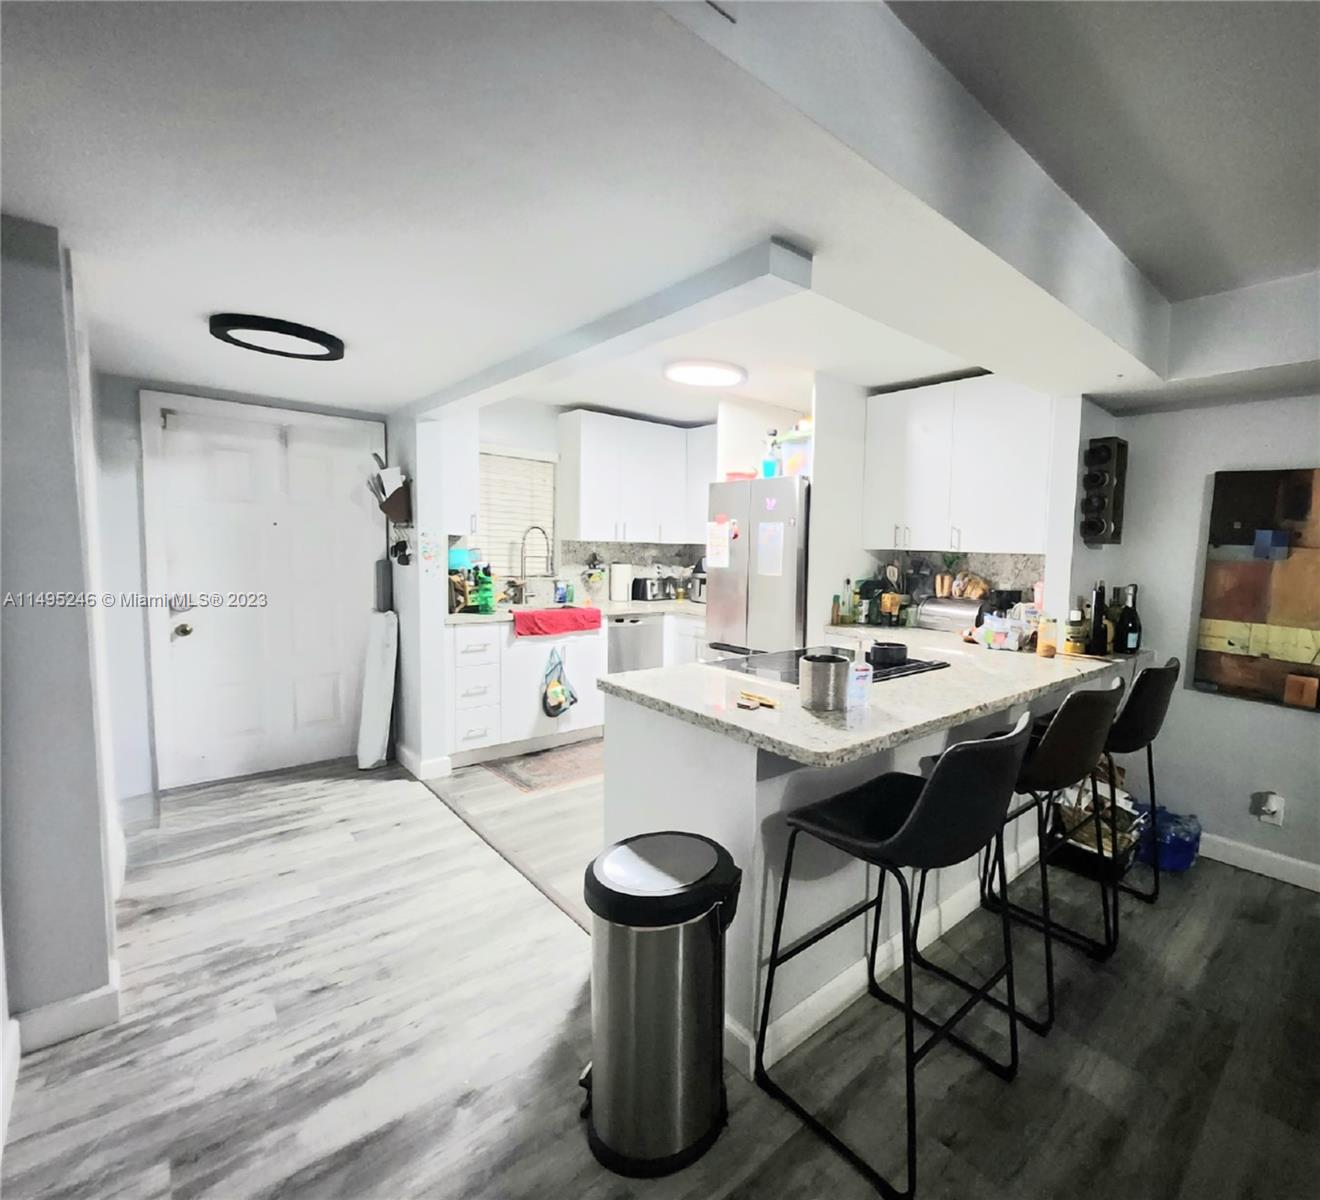 a kitchen with stainless steel appliances kitchen island granite countertop a table chairs and a refrigerator